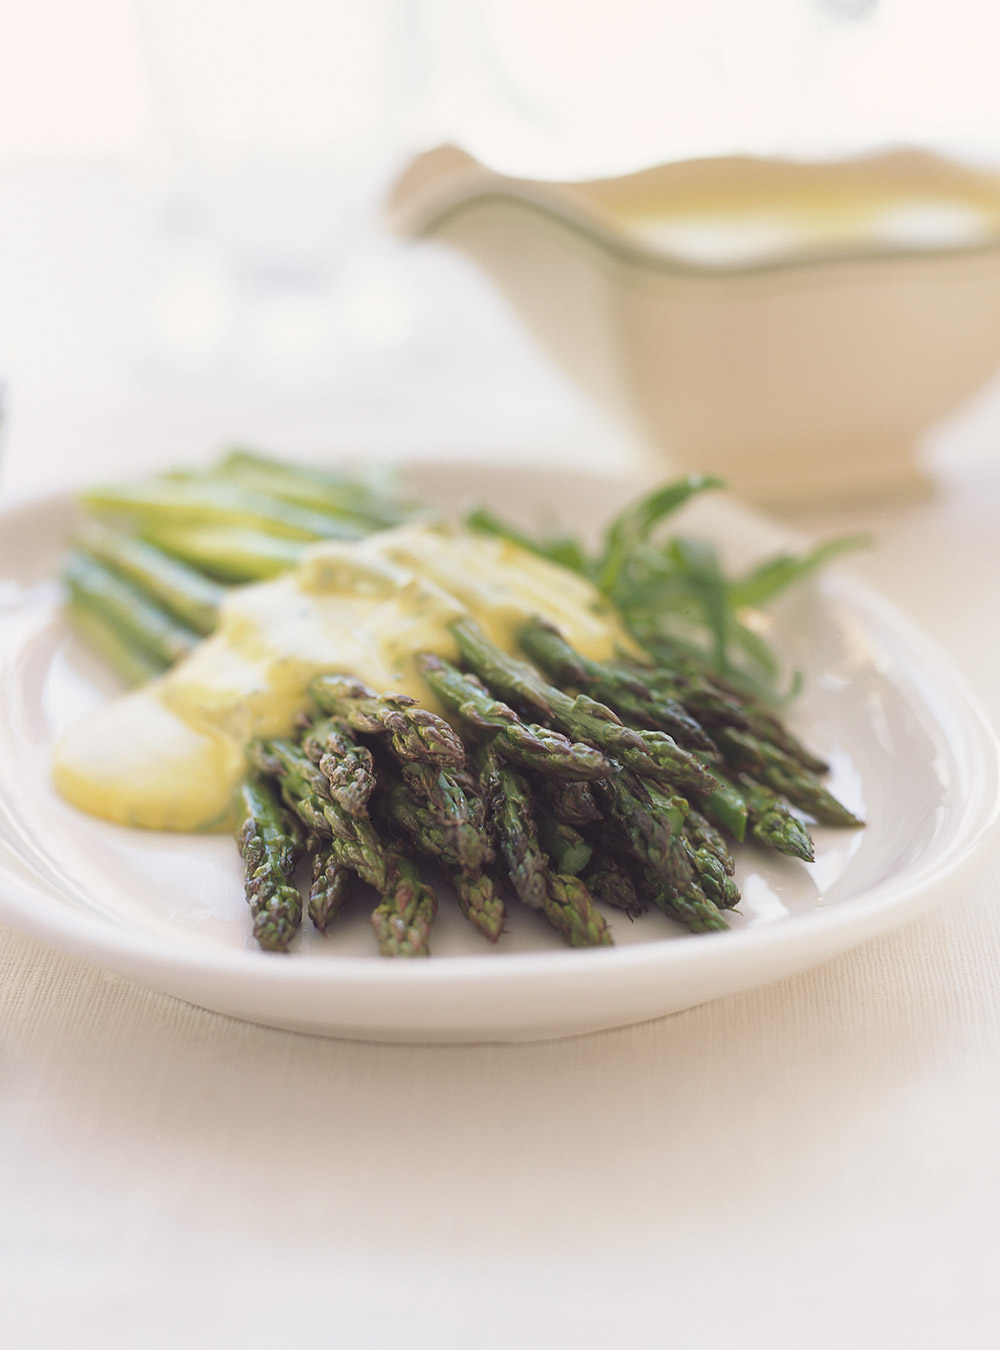 Grilled Asparagus with Tarragon Mousseline Sauce